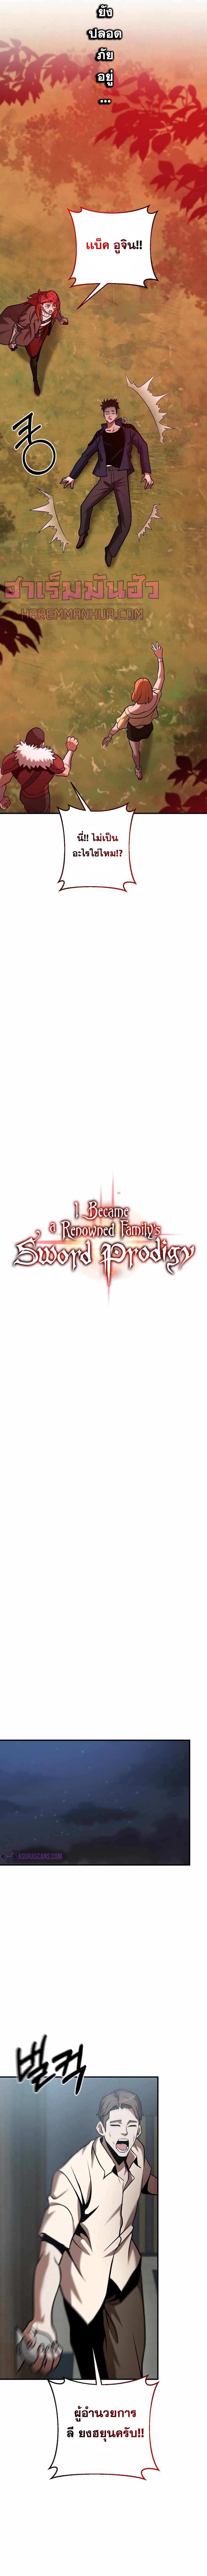 I Became a Renowned Family’s Sword Prodigy 23 05